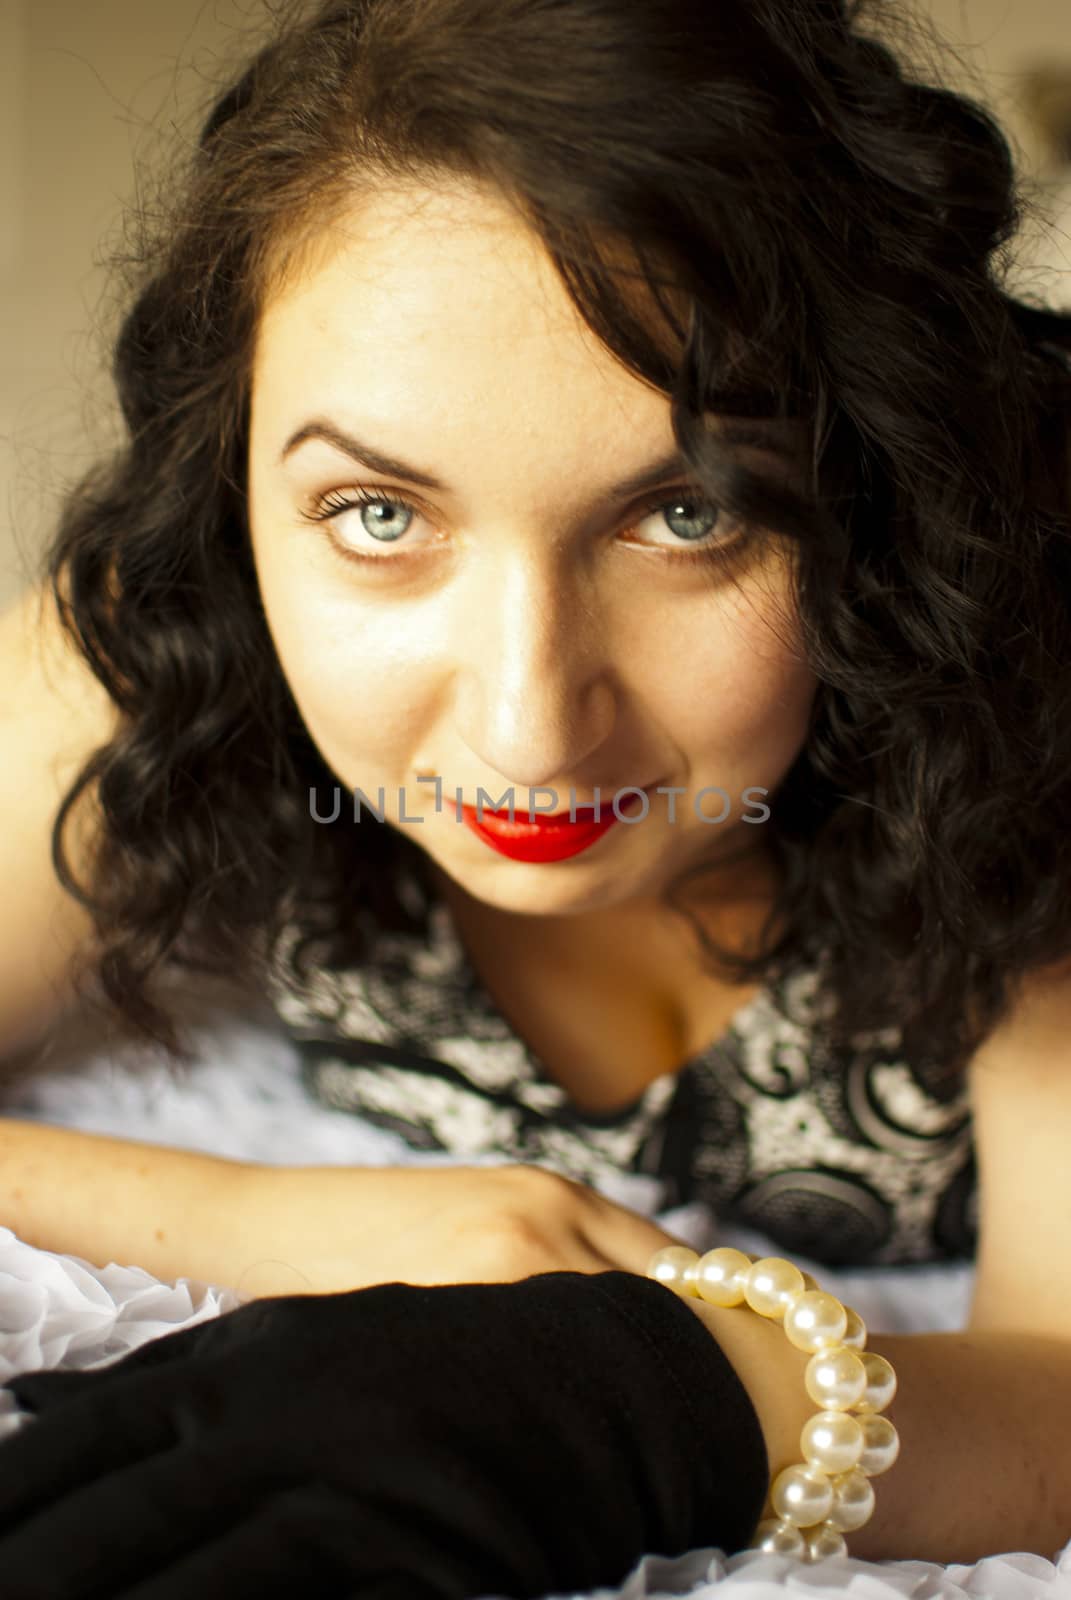 sansual retro girl portrait lying on a bed